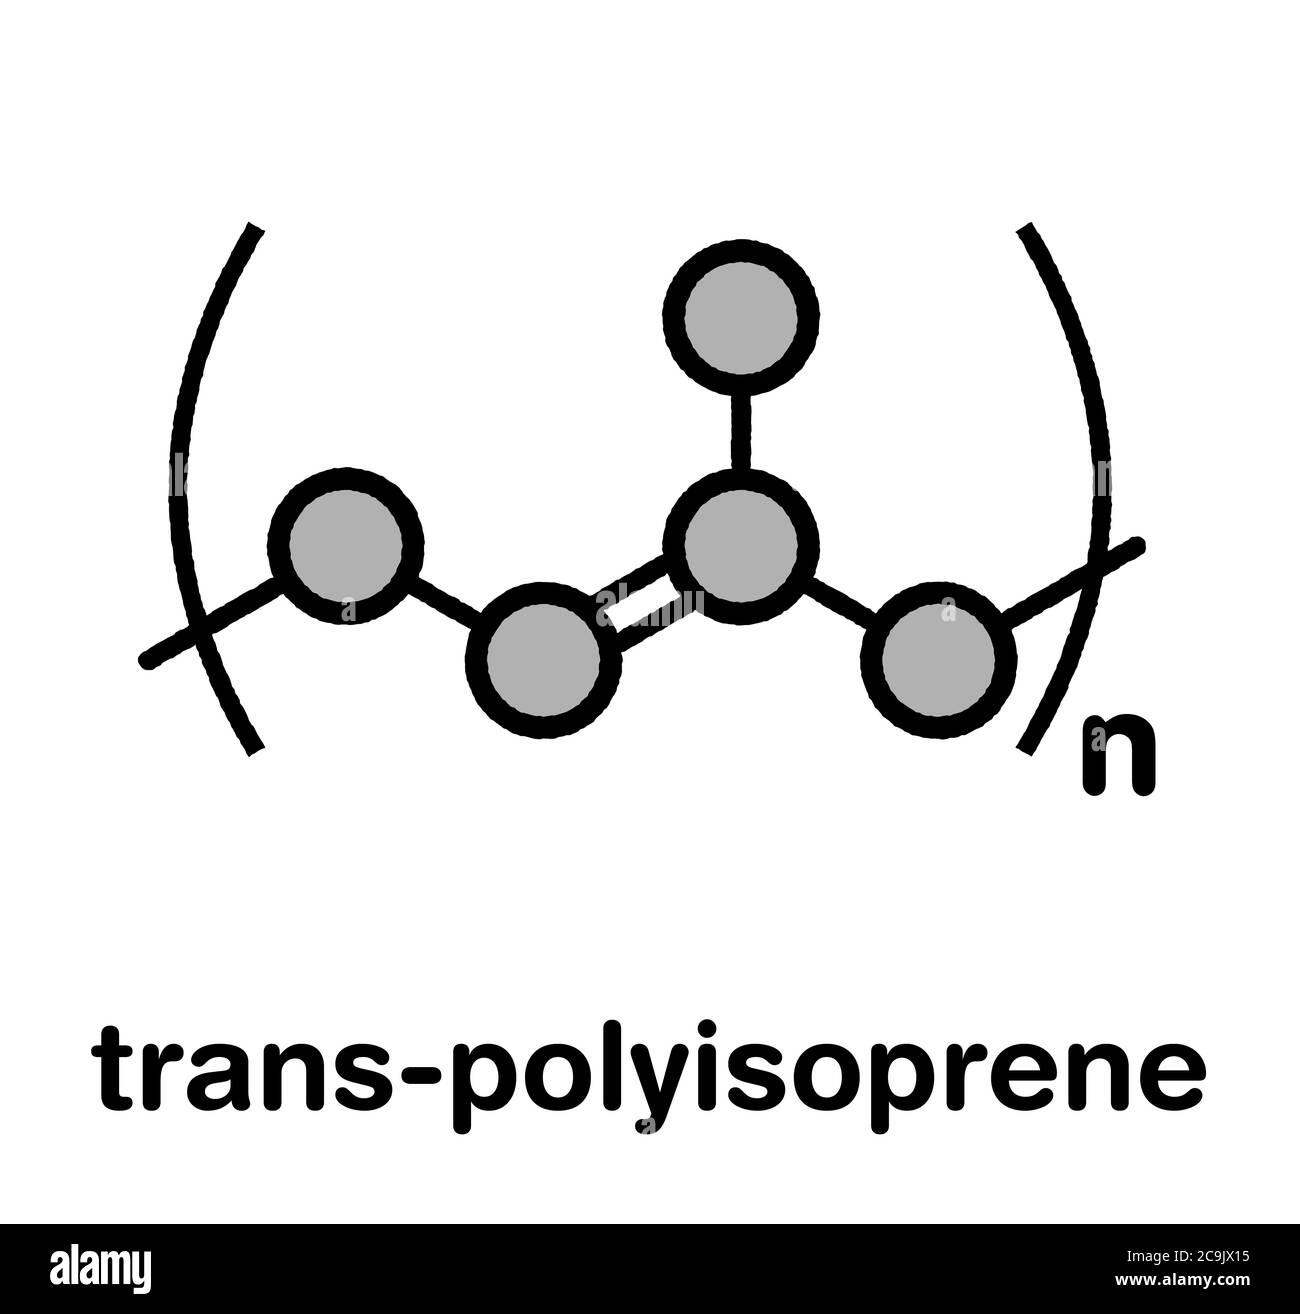 Trans-1,4-polyisoprene polymer, chemical structure. Main component of gutta-percha. Stylized skeletal formula: Atoms are shown as color-coded circles Stock Photo